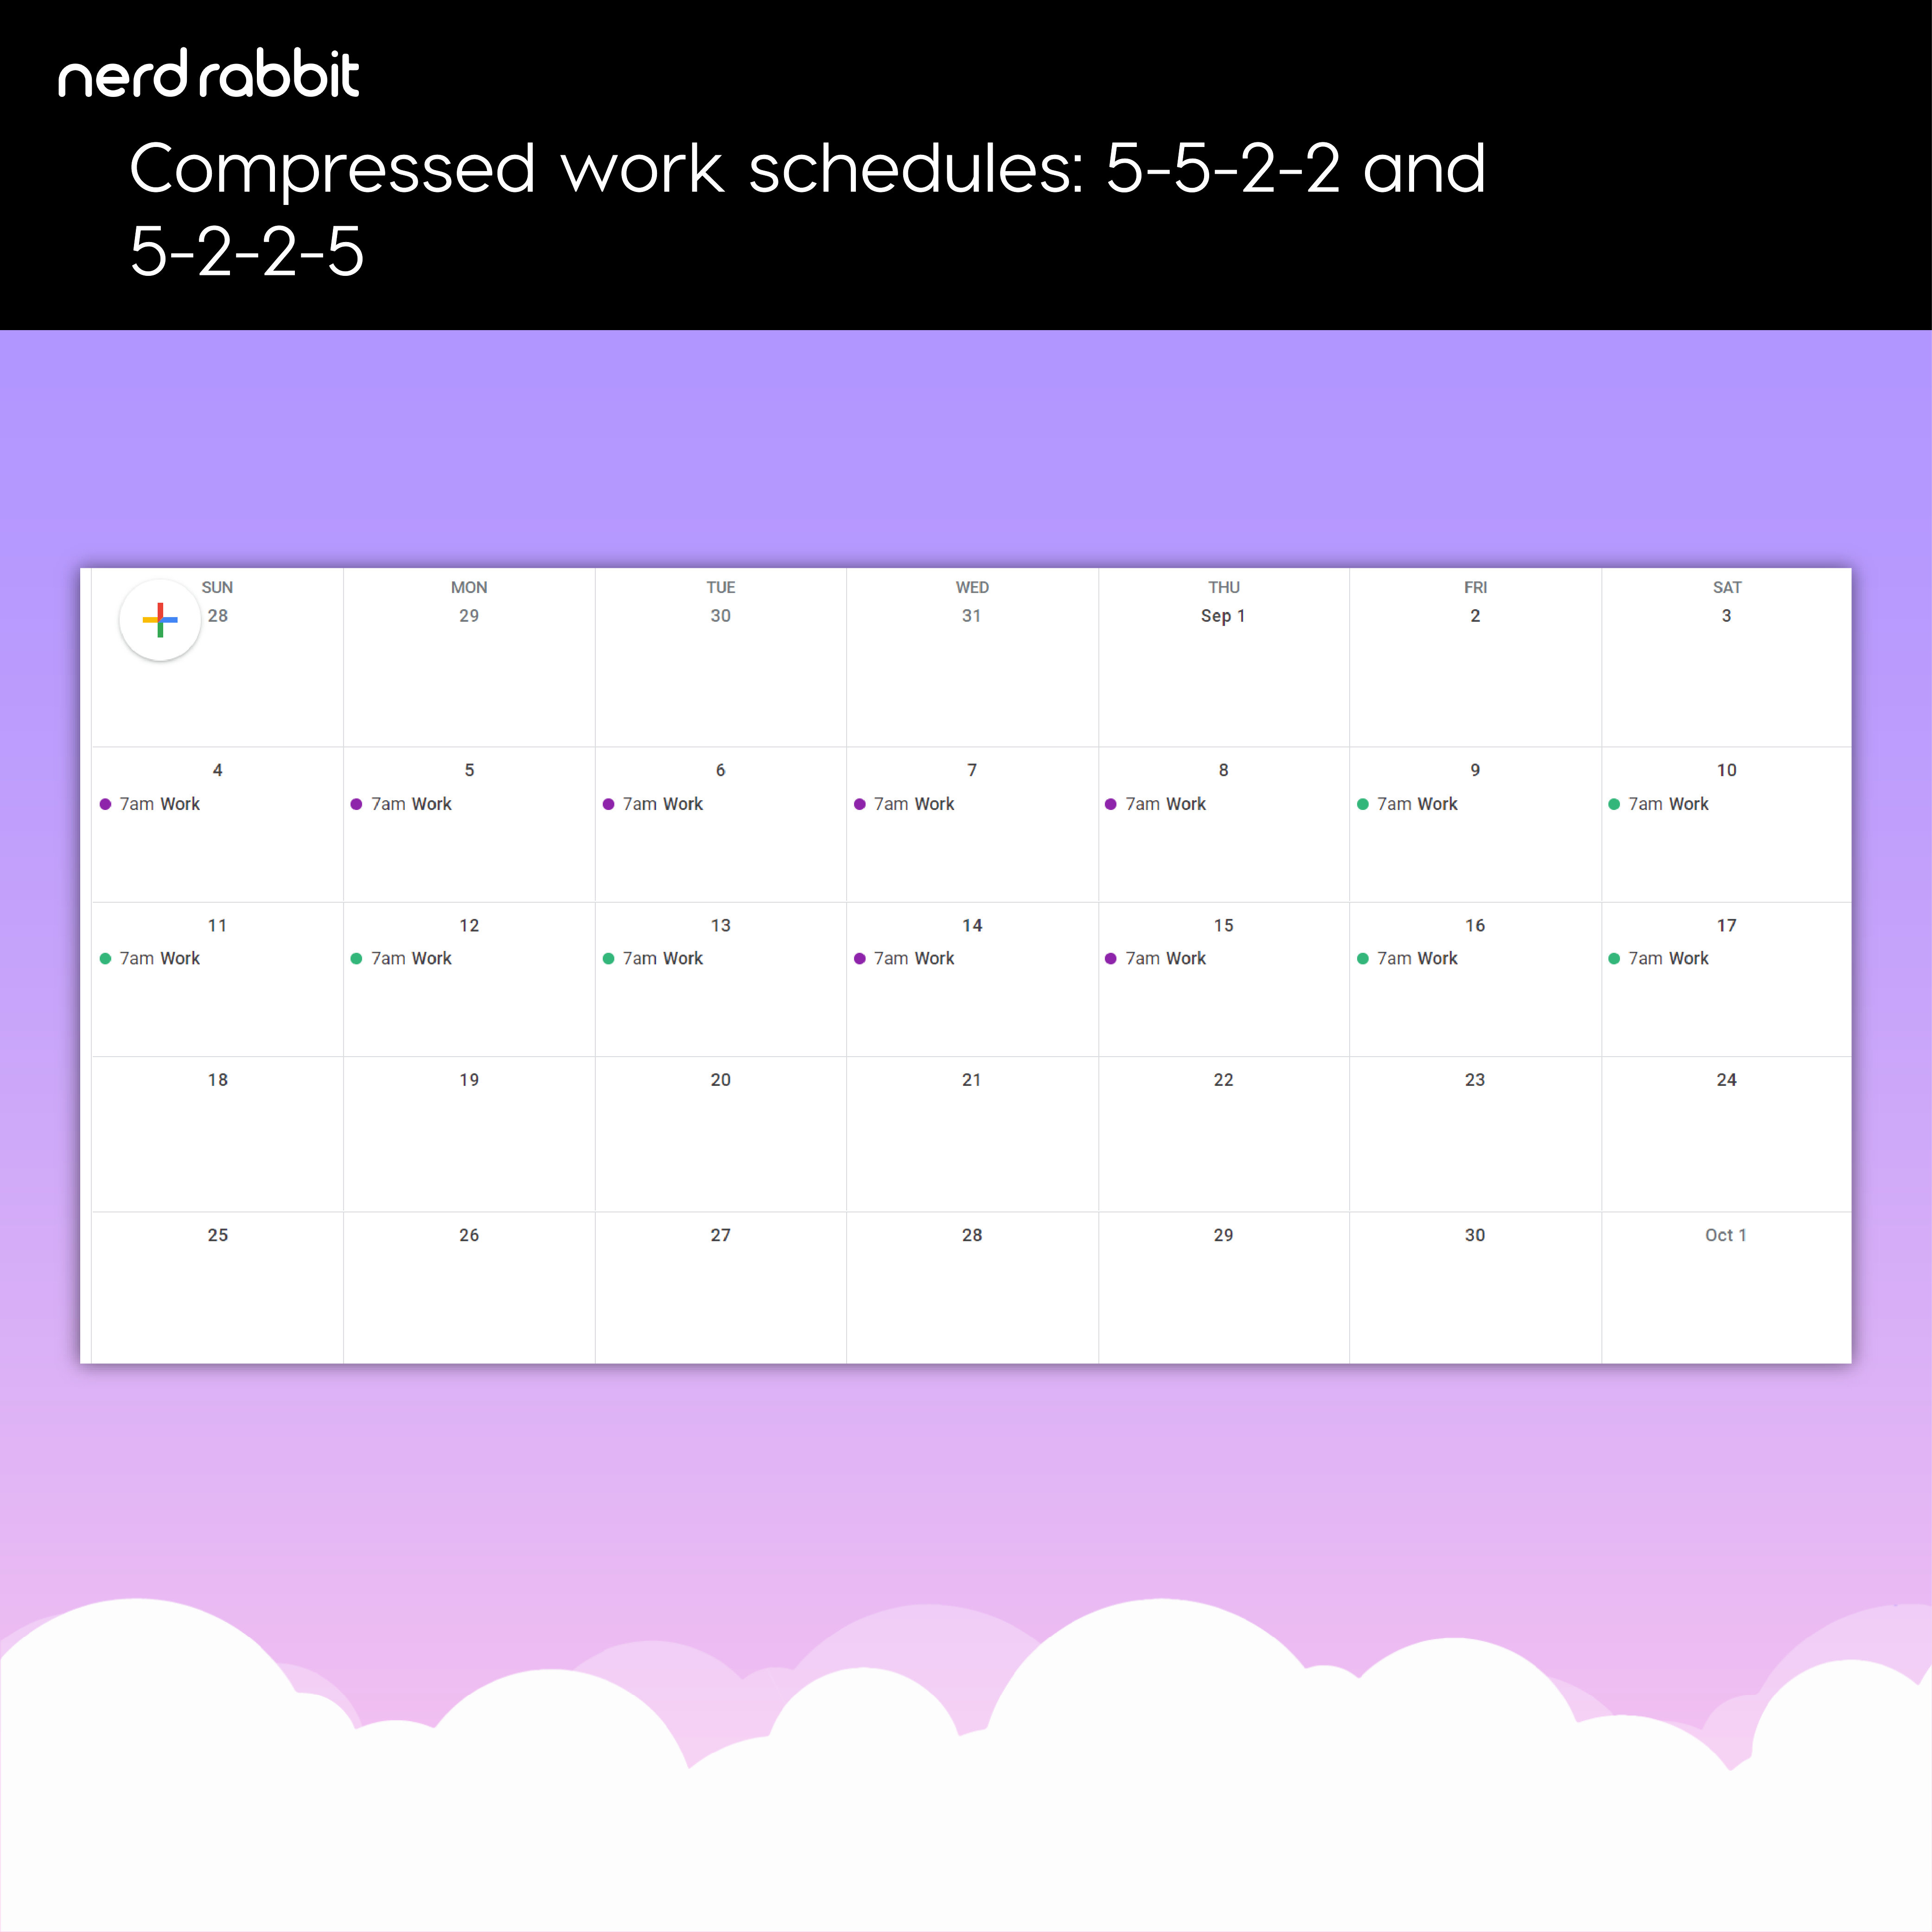 Picture of a 5-5-2-2 compressed work schedule.